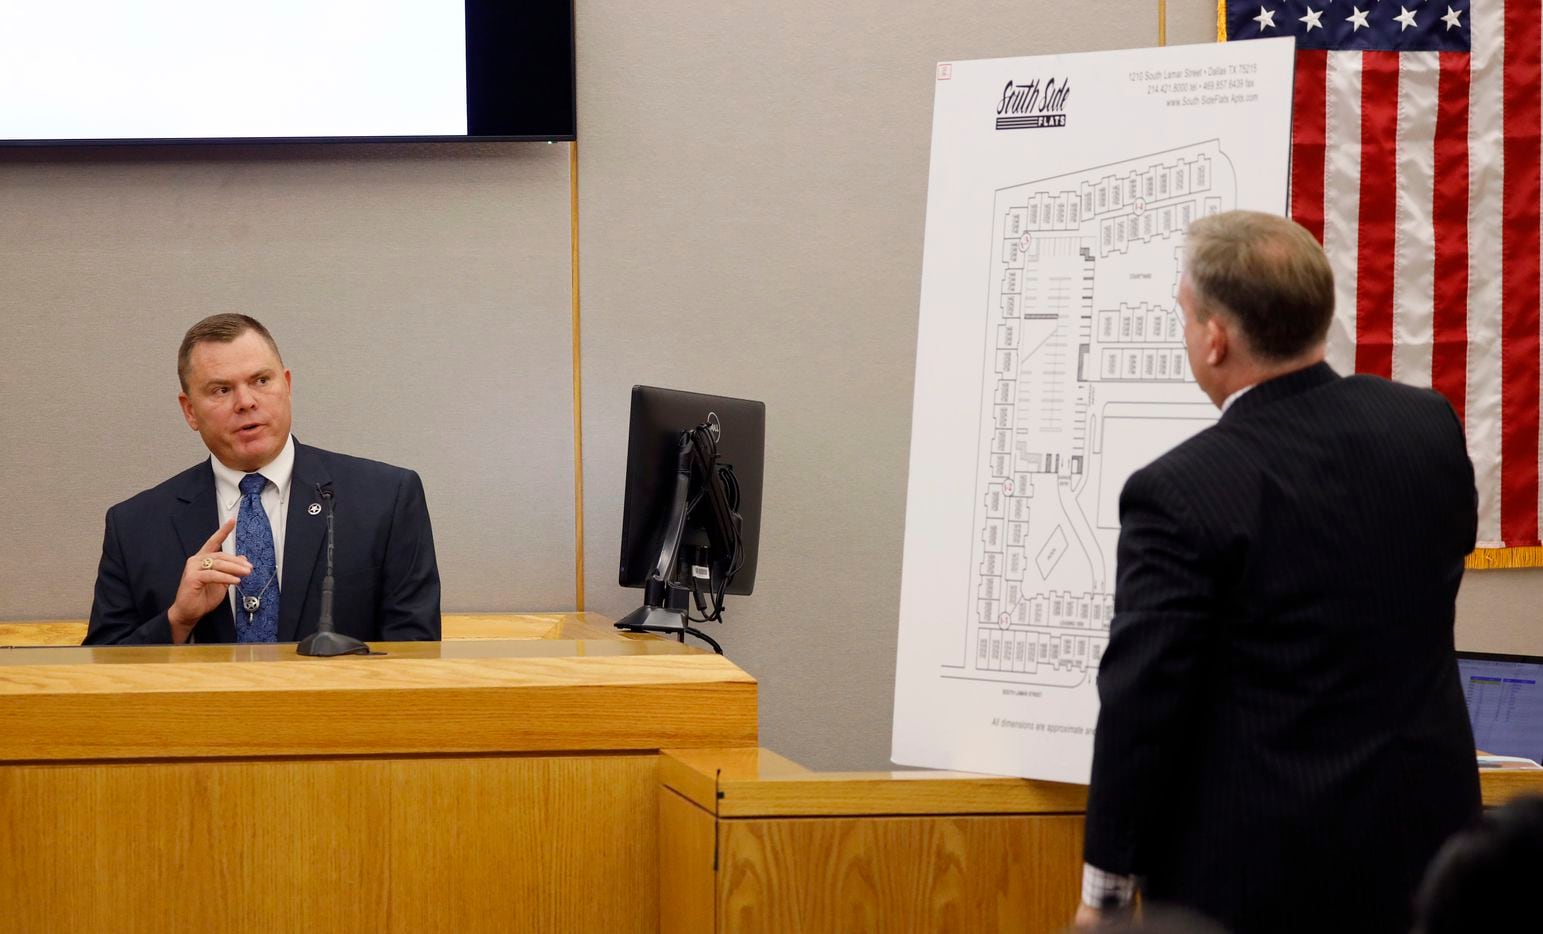 Assistant District Attorney Jason Hermus (right) questions Texas Ranger Michael Stoner on the witness stand during the morning session. Fired Dallas police Officer Amber Guyger is facing a murder charge in the 204th District Court at the Frank Crowley Courts Building in Dallas, Thursday, September 26, 2019. 